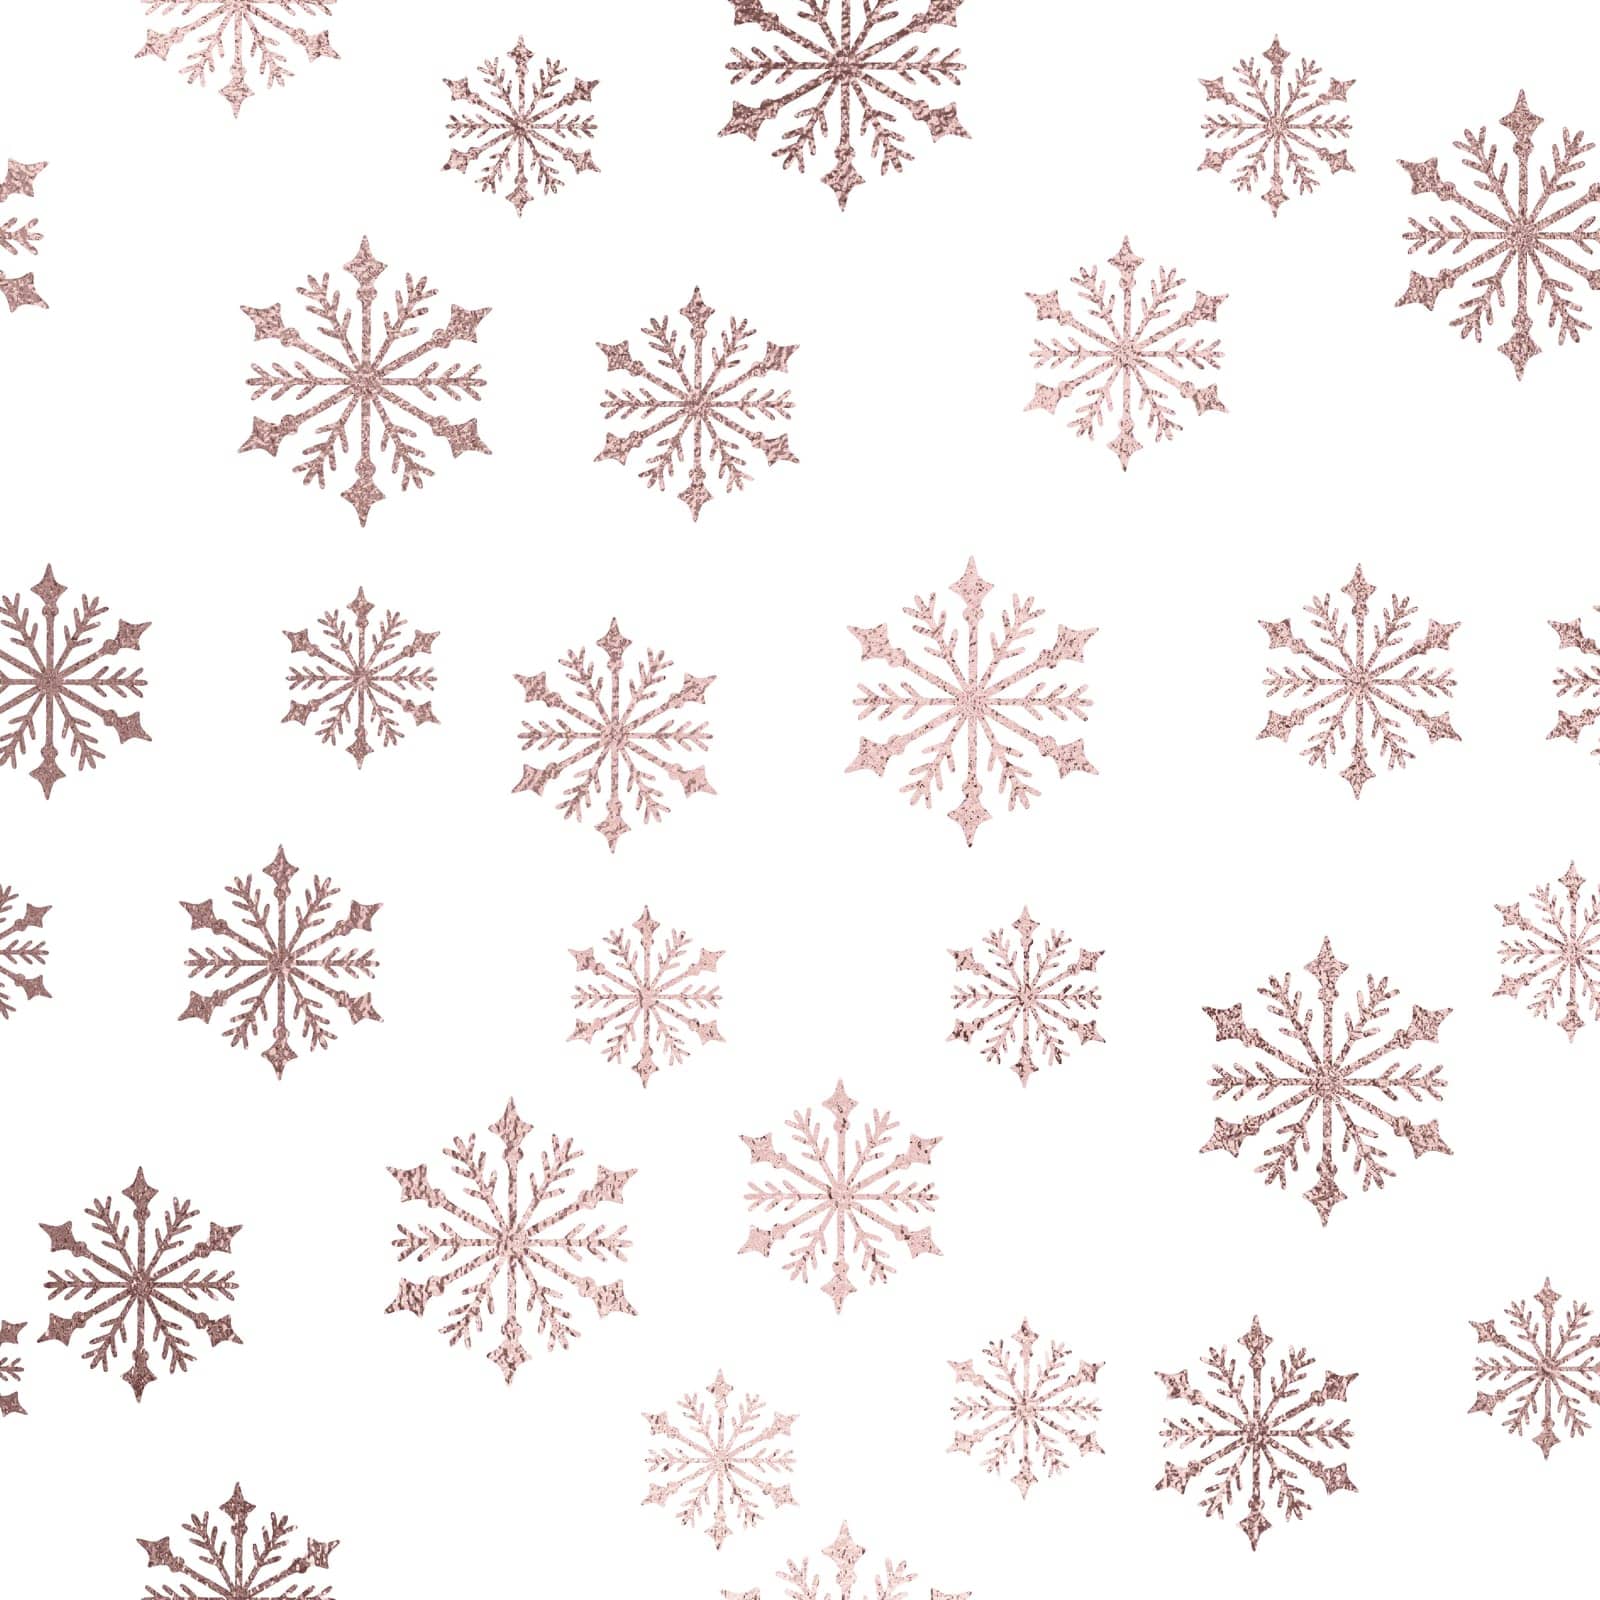 Rose golden snowflakes over layer transparent background